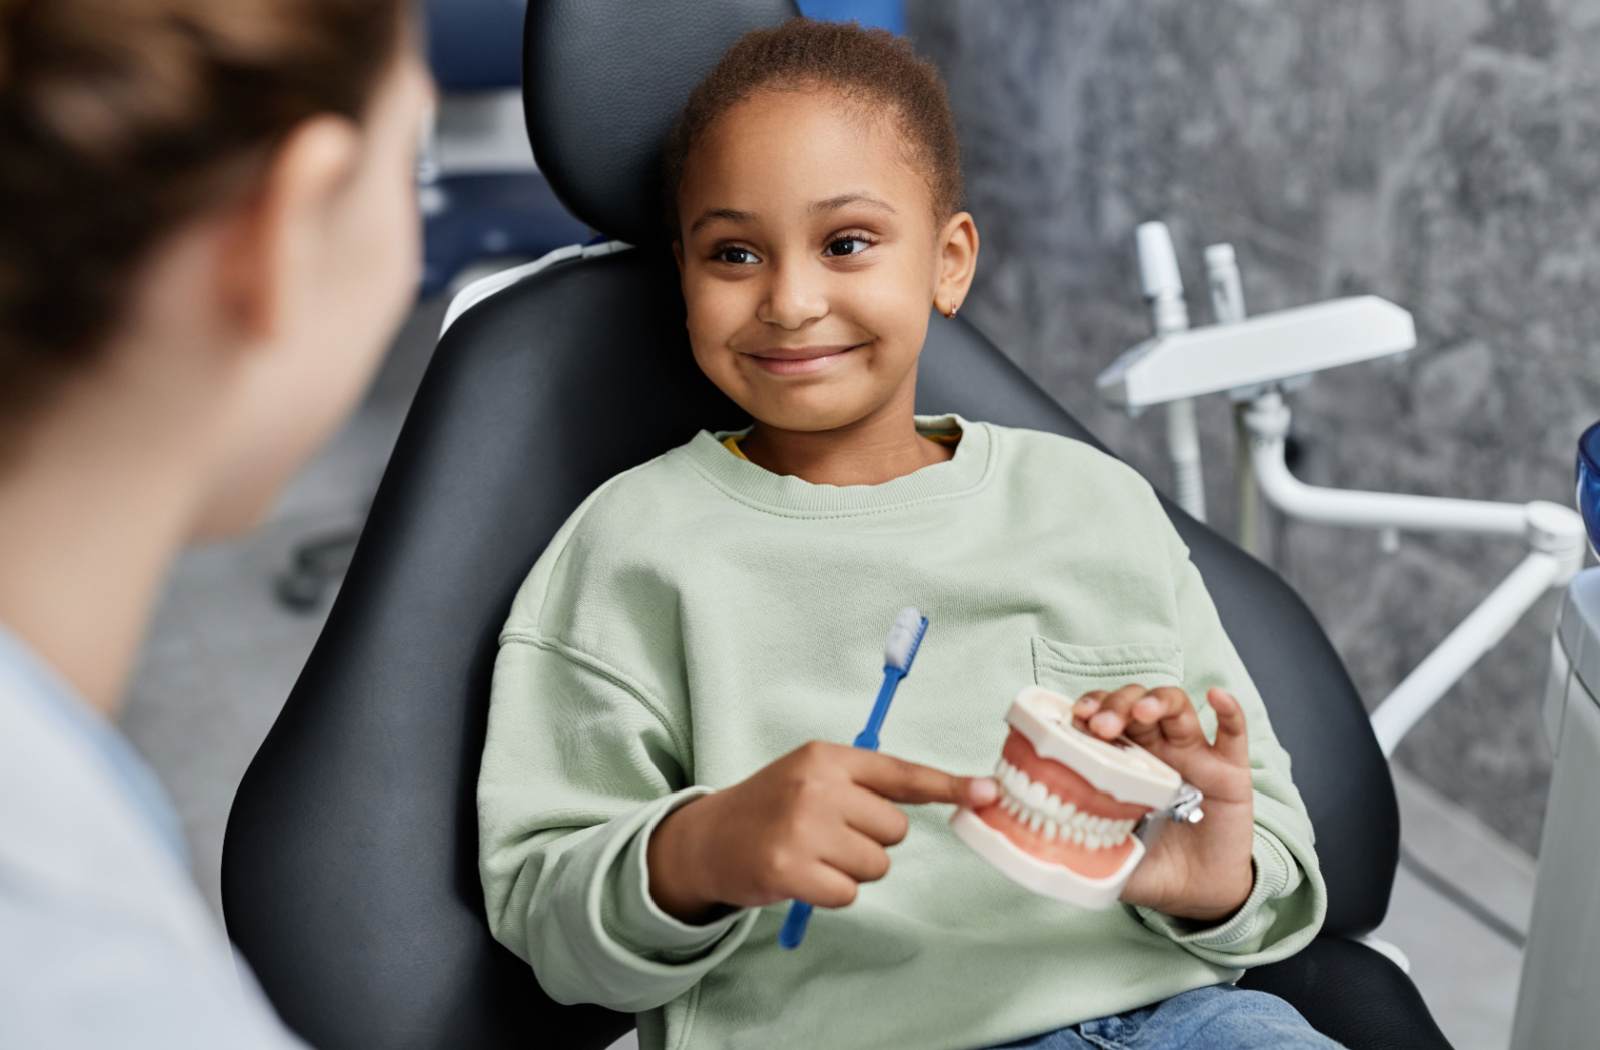 A smiling child in dental chair holding a model of teeth and a tooth brush.